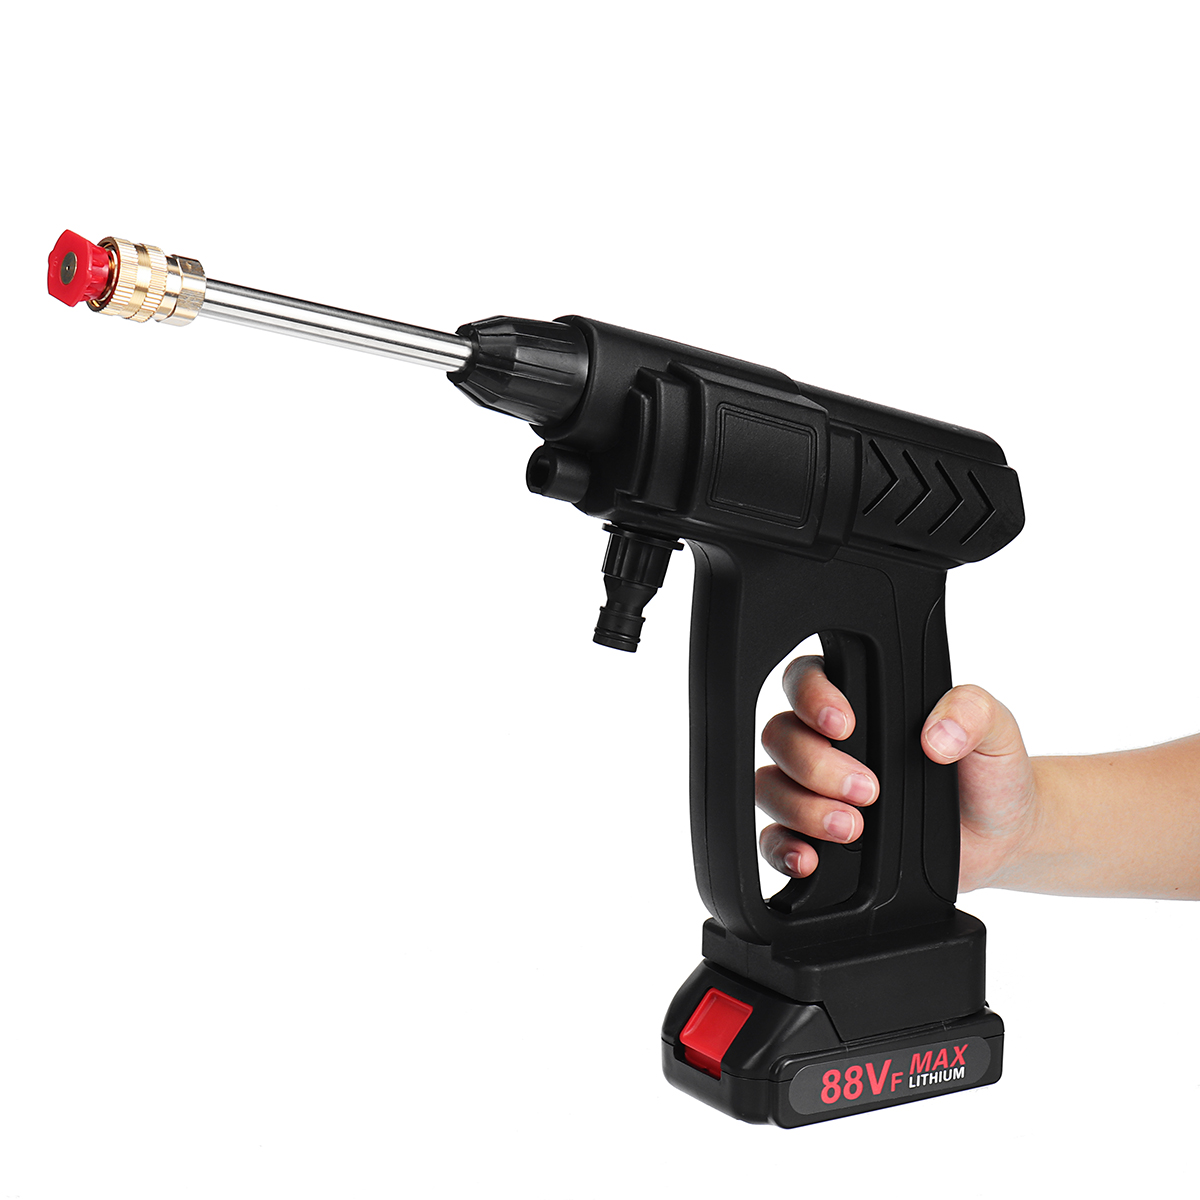 1500W-15000rm-Cordless-High-Pressure-Washer-Spray-Guns-Nozzle-Cleaner-For-Makita-18V-Battery-1893539-8